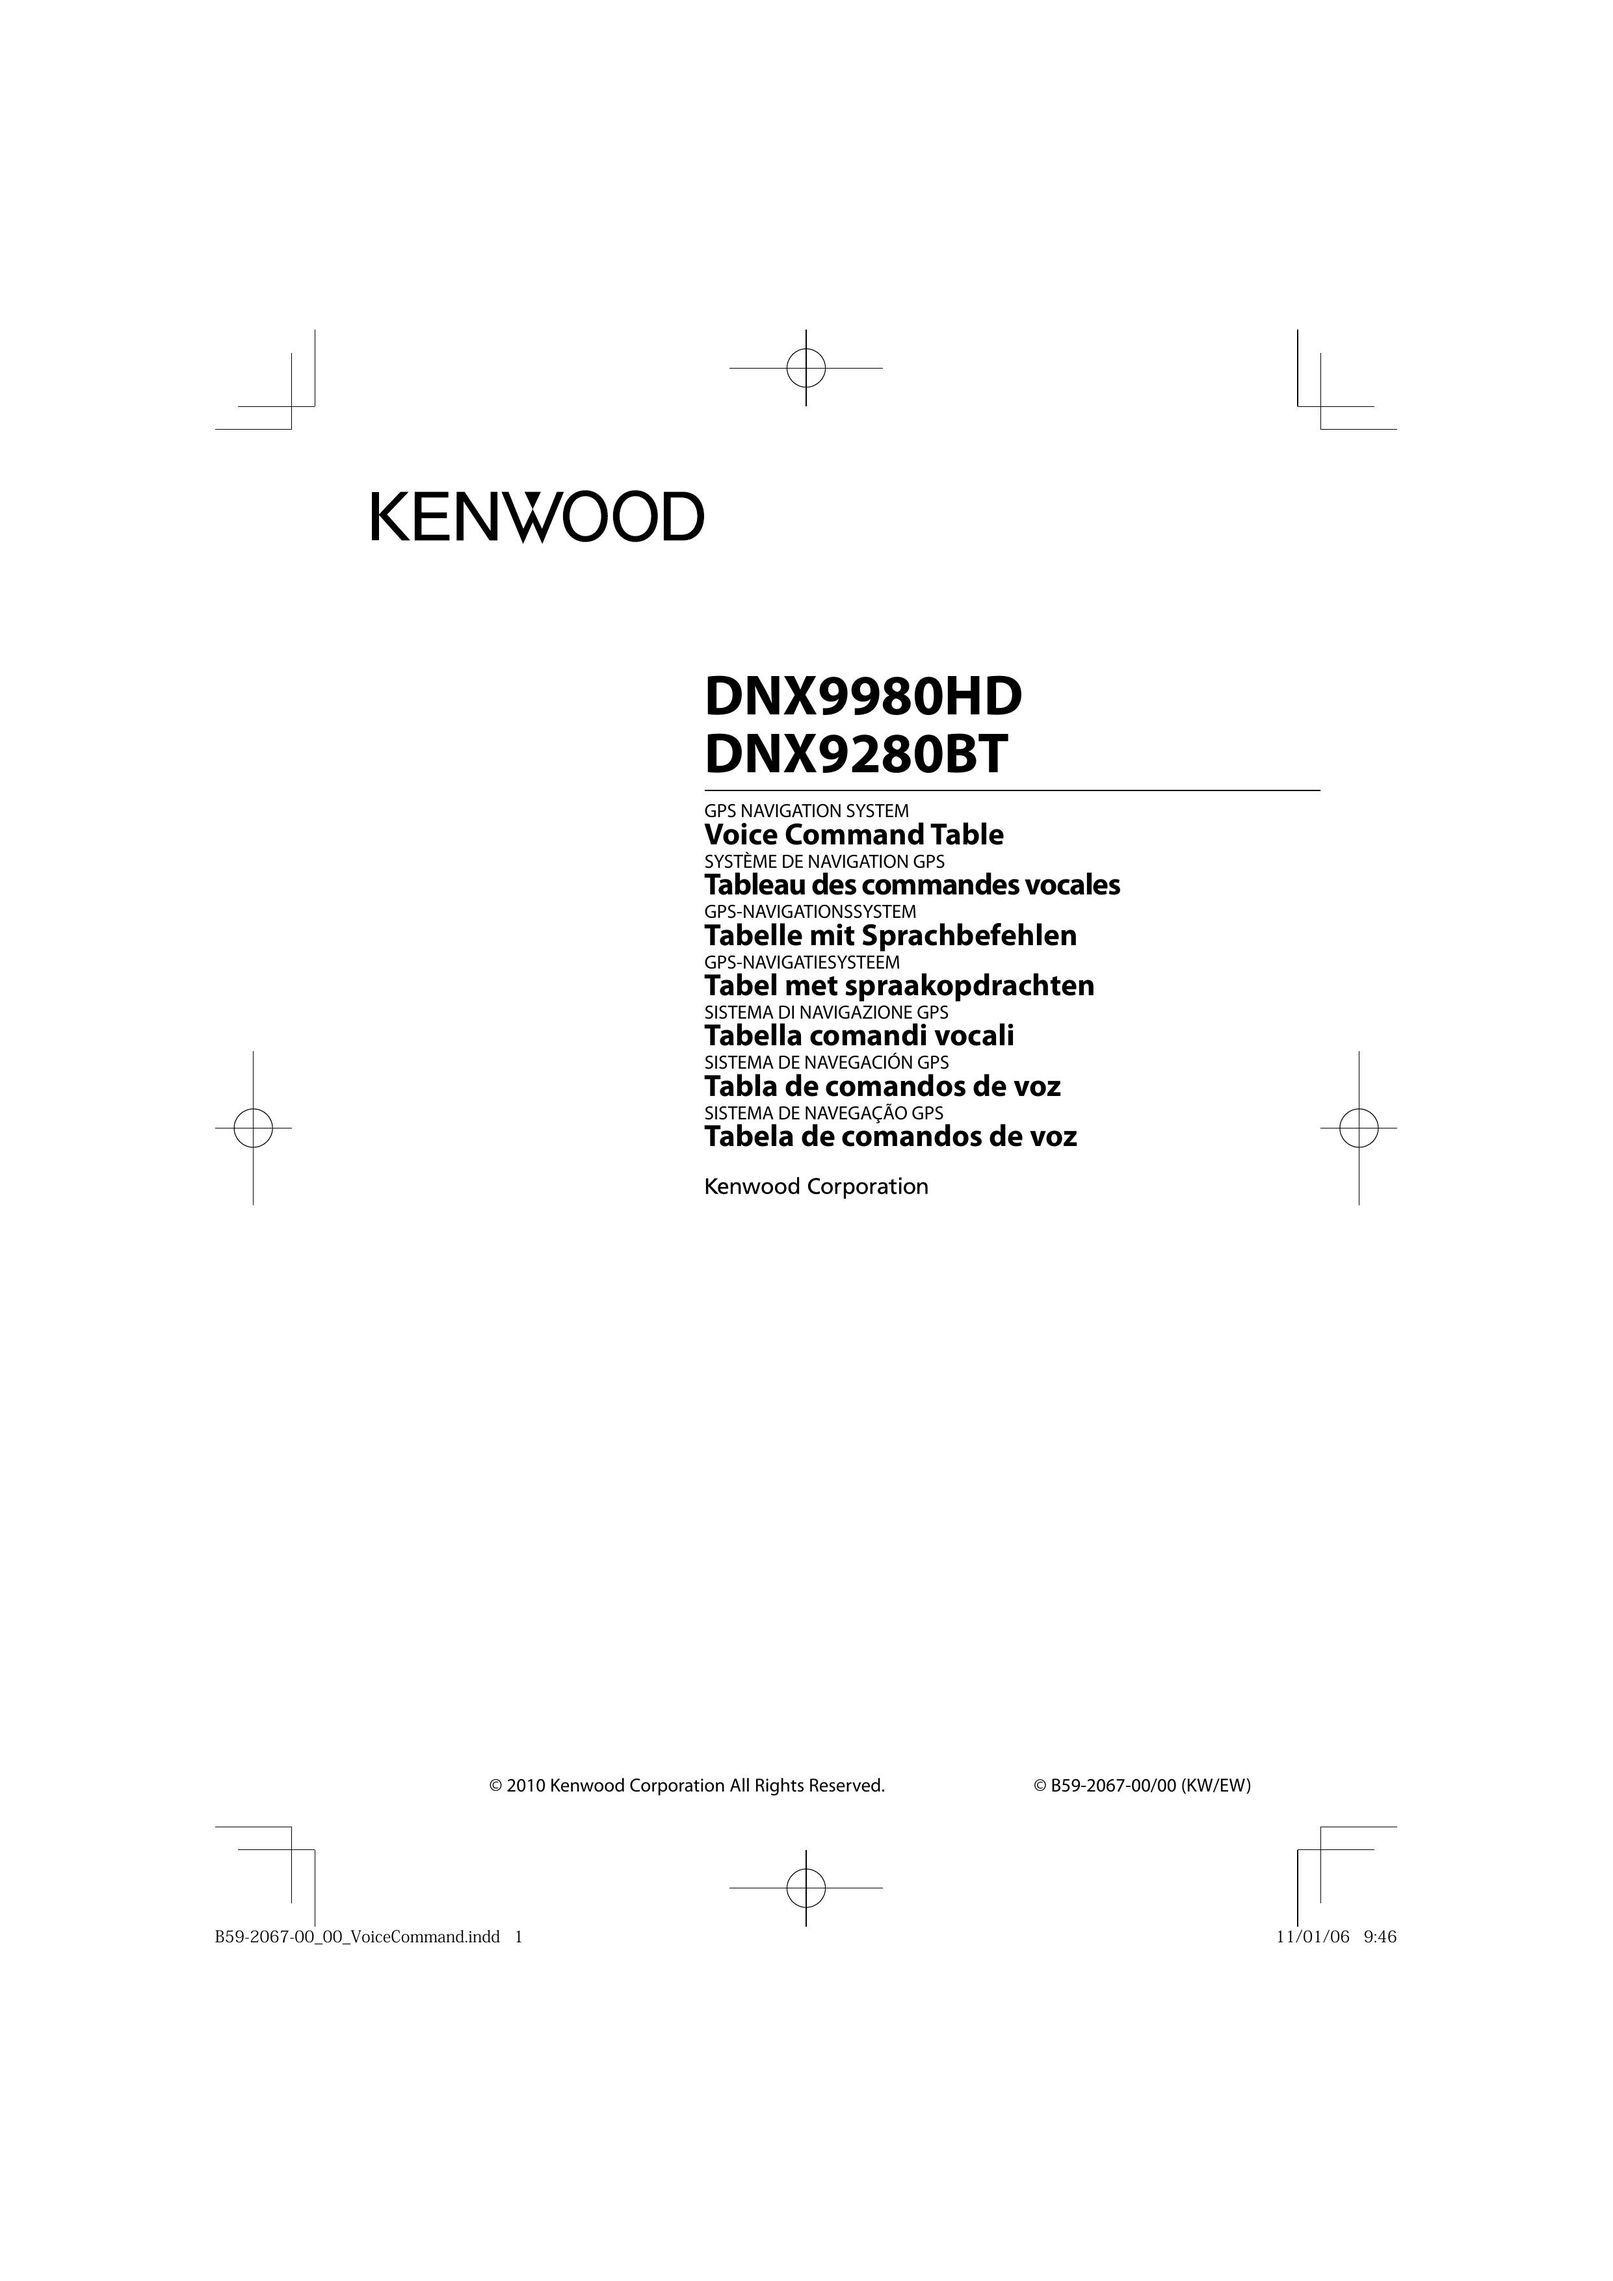 Kenwood DNX9280BT Car Stereo System User Manual